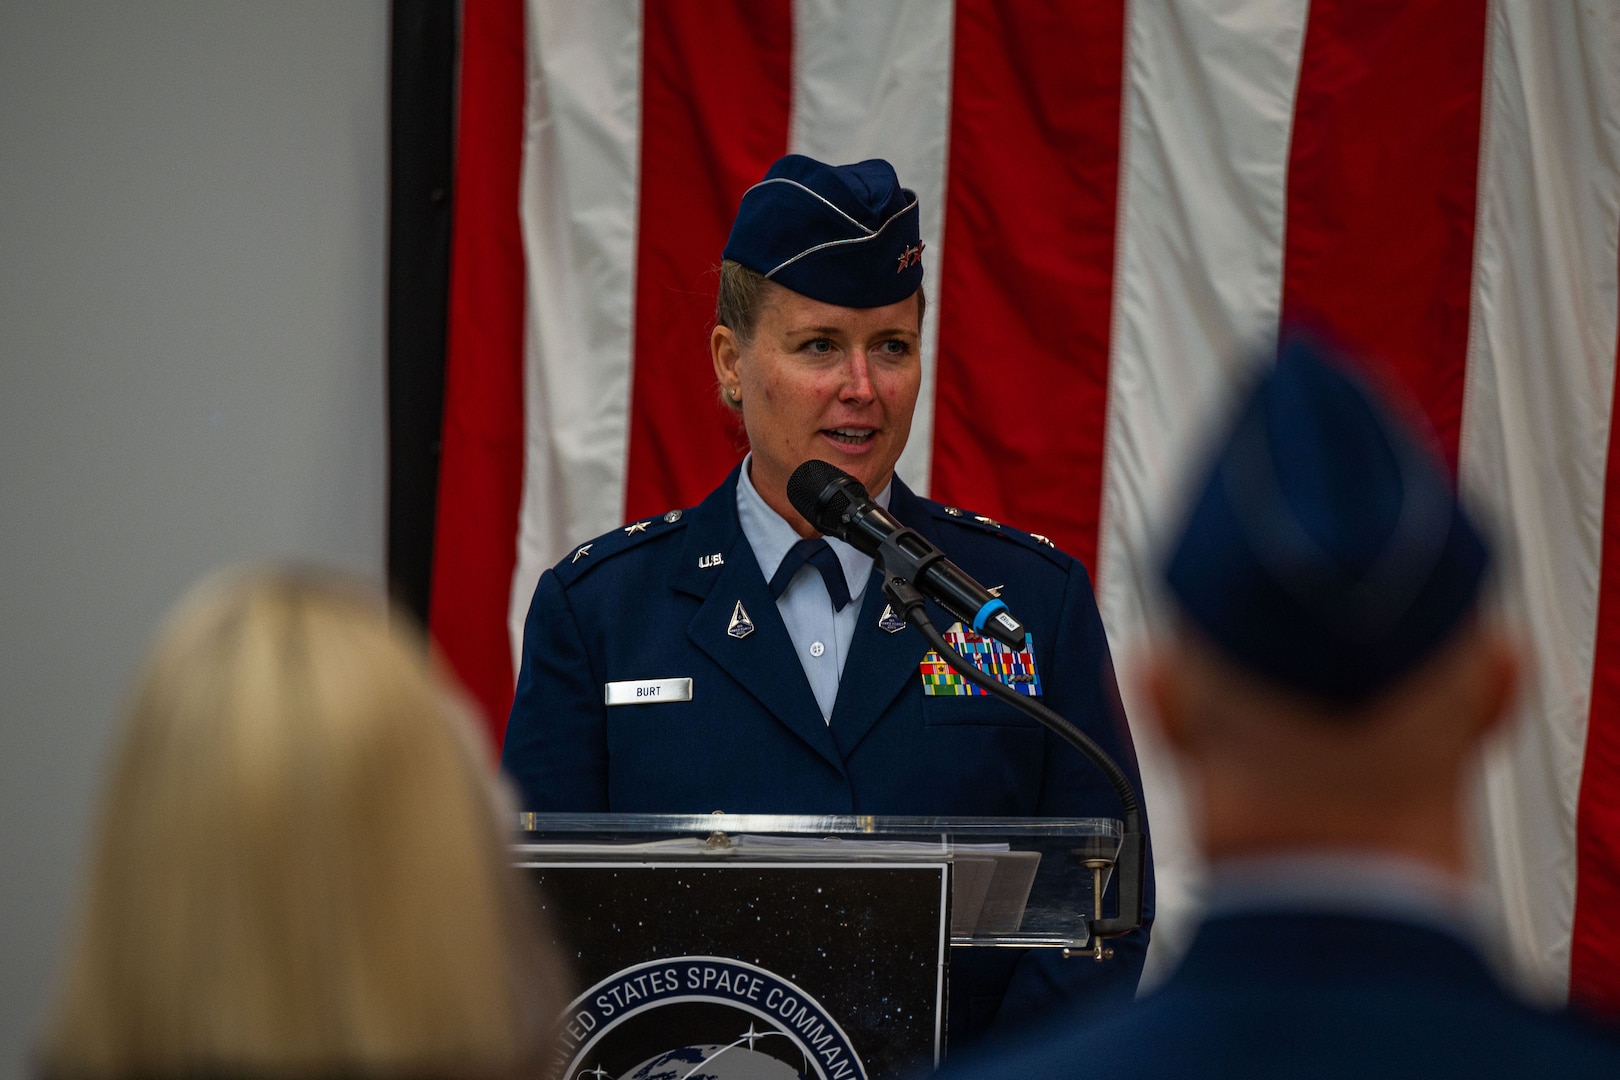 U.S. Space Force Maj. Gen. DeAnna Burt, former Combined Force Space Component Command (CFSCC) commander, speaks to attendees of the CFSCC change of command ceremony at Vandenberg Space Force Base, Calif., Aug. 22, 2022. Burt served as CFSCC’s commander for 21 months, managing global space operations and space traffic management around the globe. (U.S. Space Force photo by Tech. Sgt. Luke Kitterman)